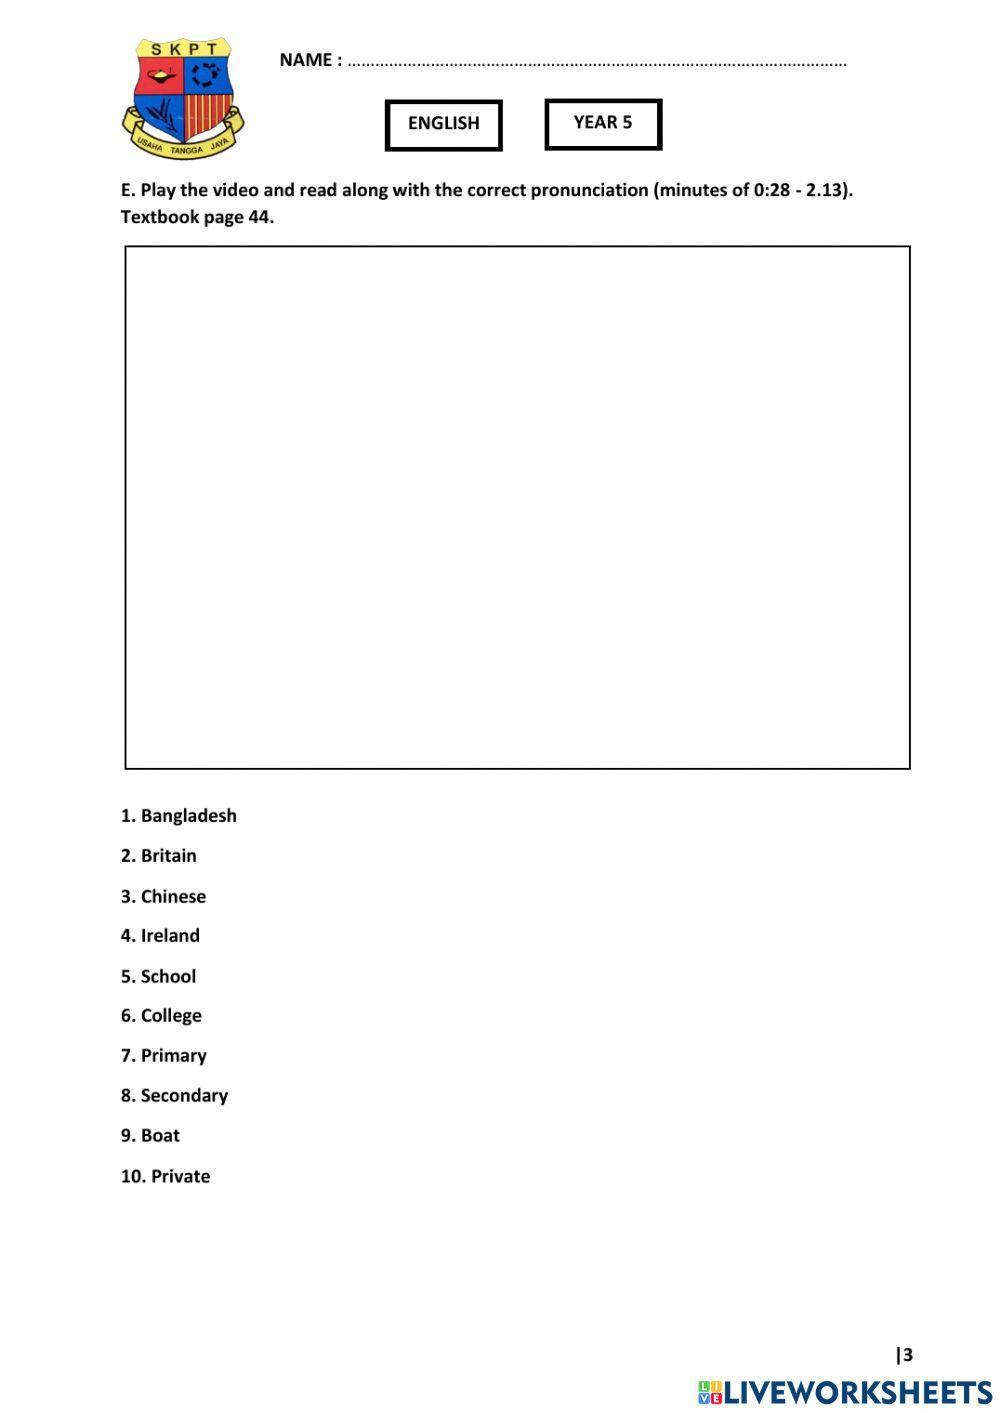 Year 5 Plus 1 - Unit 4 Learning World - Student's Book Page 44